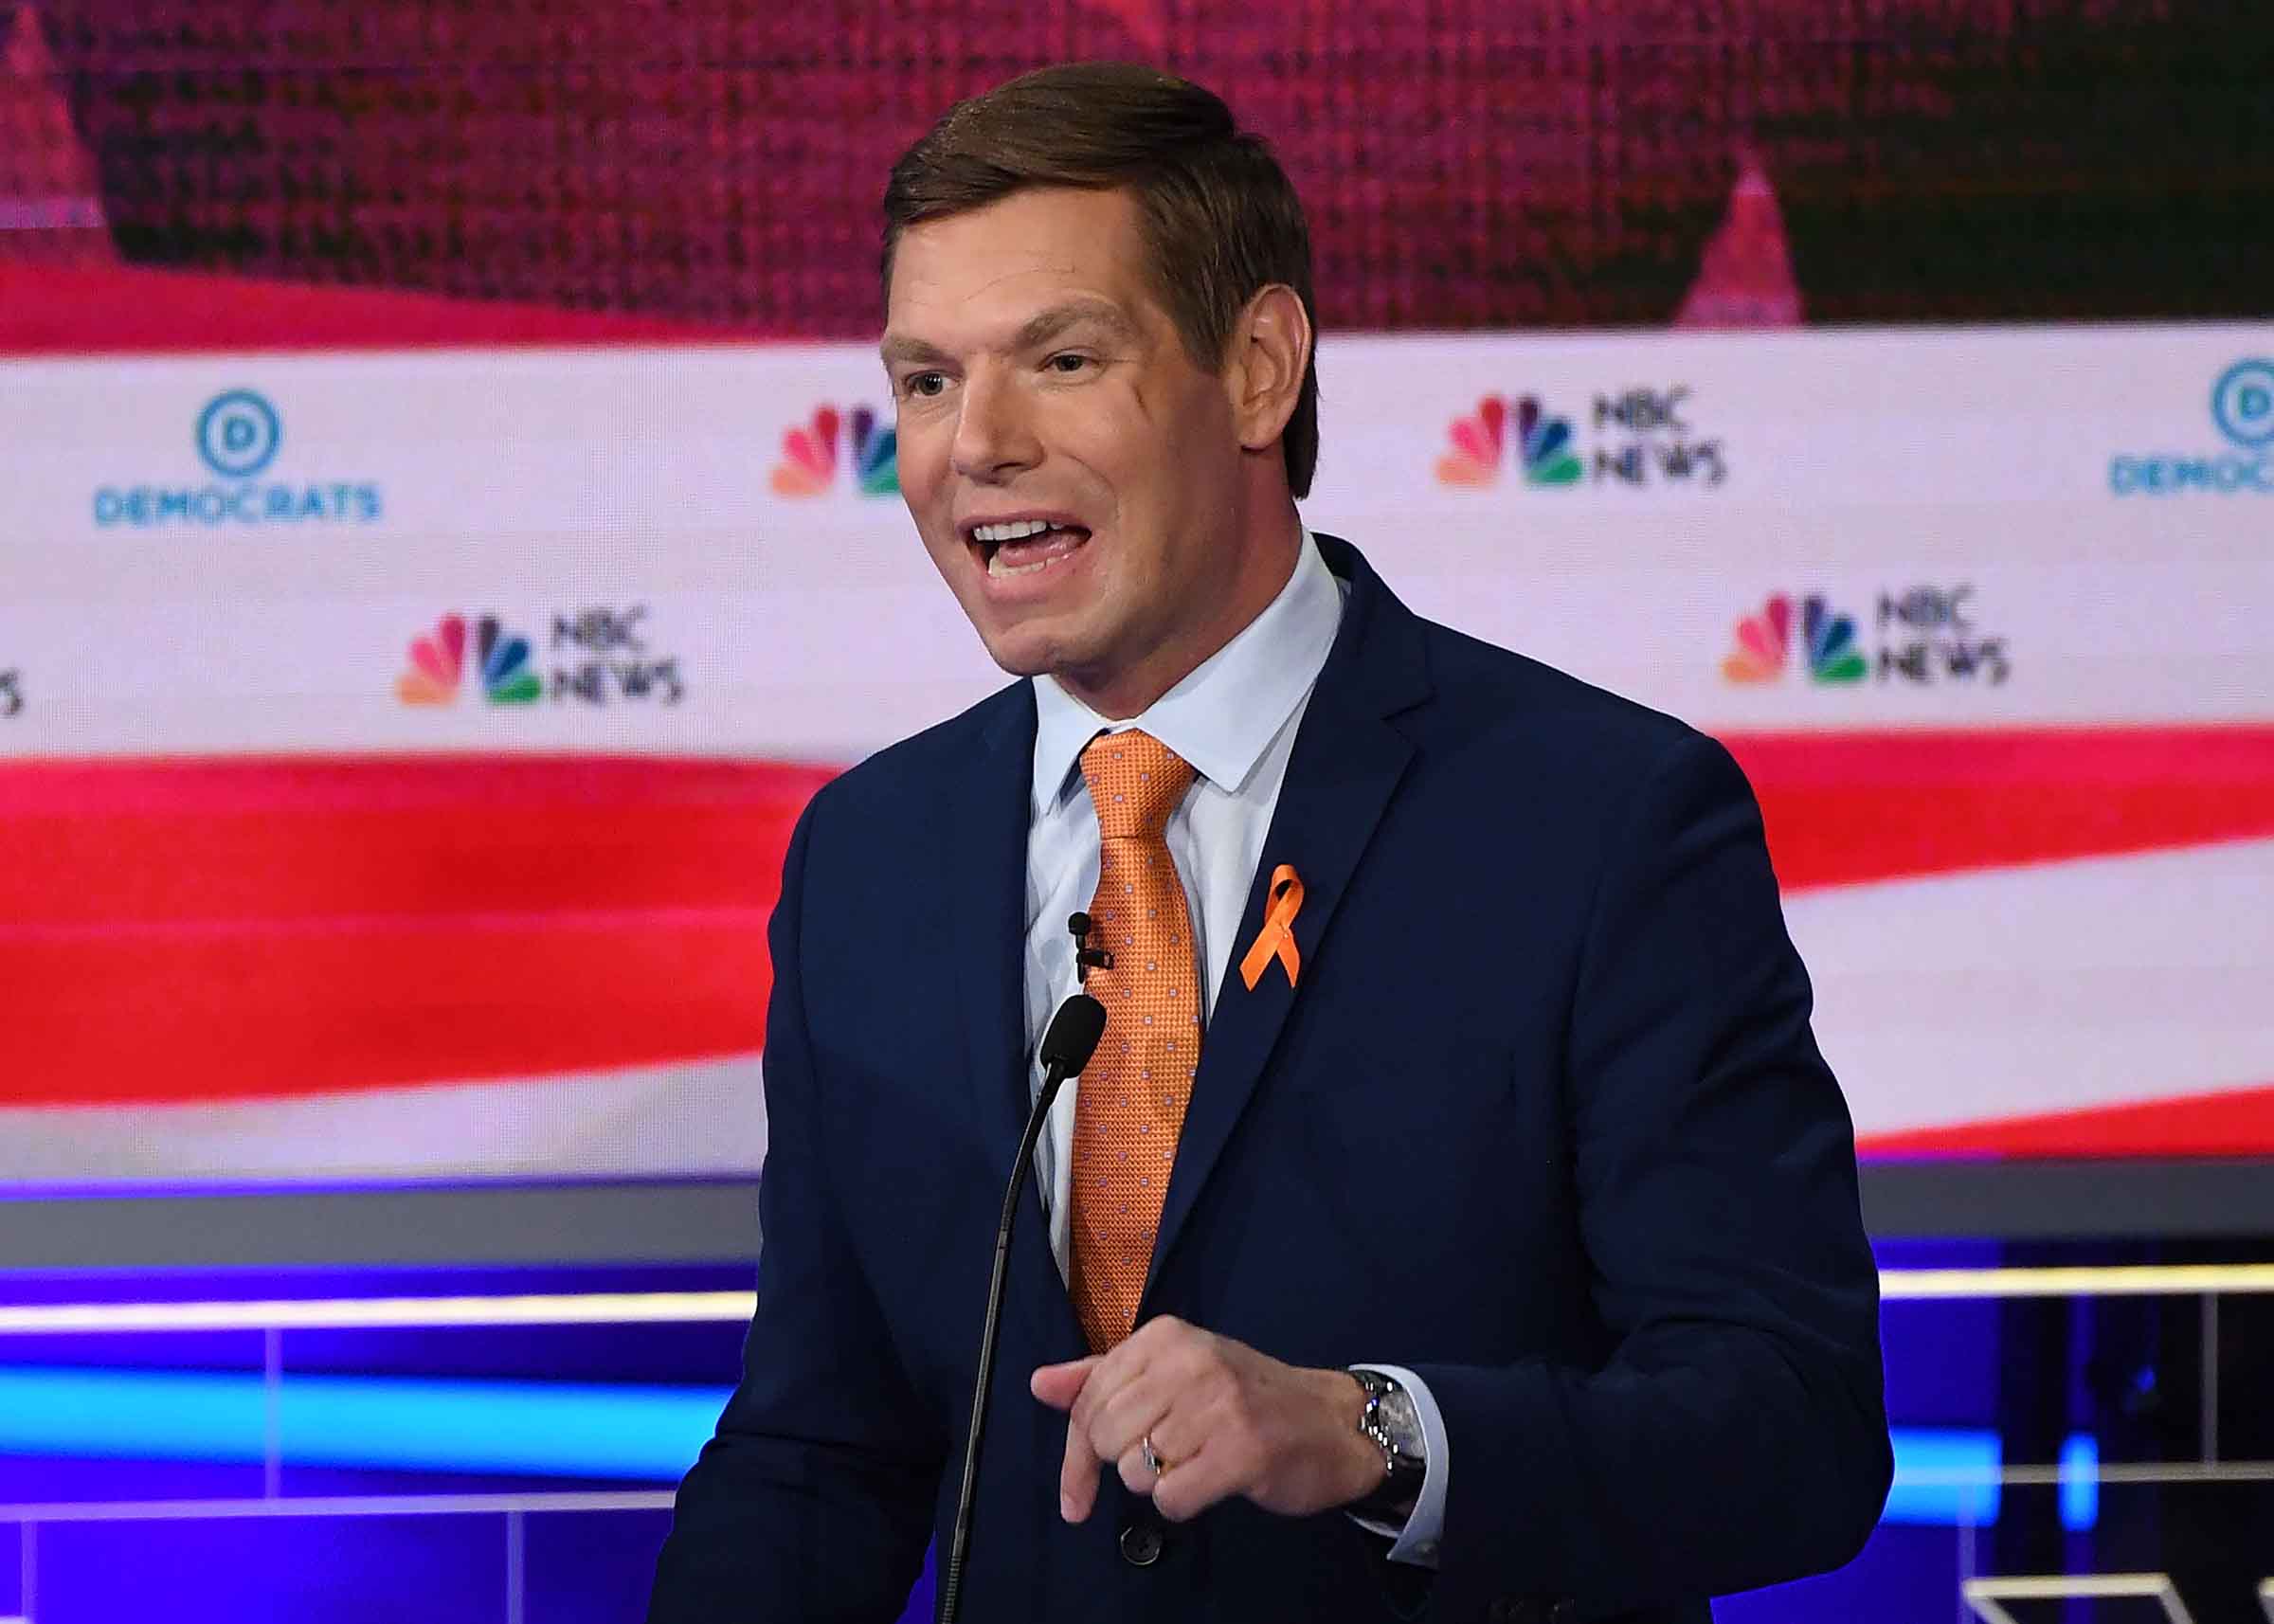 Democratic presidential hopeful former US Representative for California's 15th congressional district Eric Swalwell speaks during the second Democratic primary debate of the 2020 presidential campaign season hosted by NBC News at the Adrienne Arsht Center for the Performing Arts in Miami, Florida, June 27, 2019. (Saul Loeb—AFP/Getty Images)